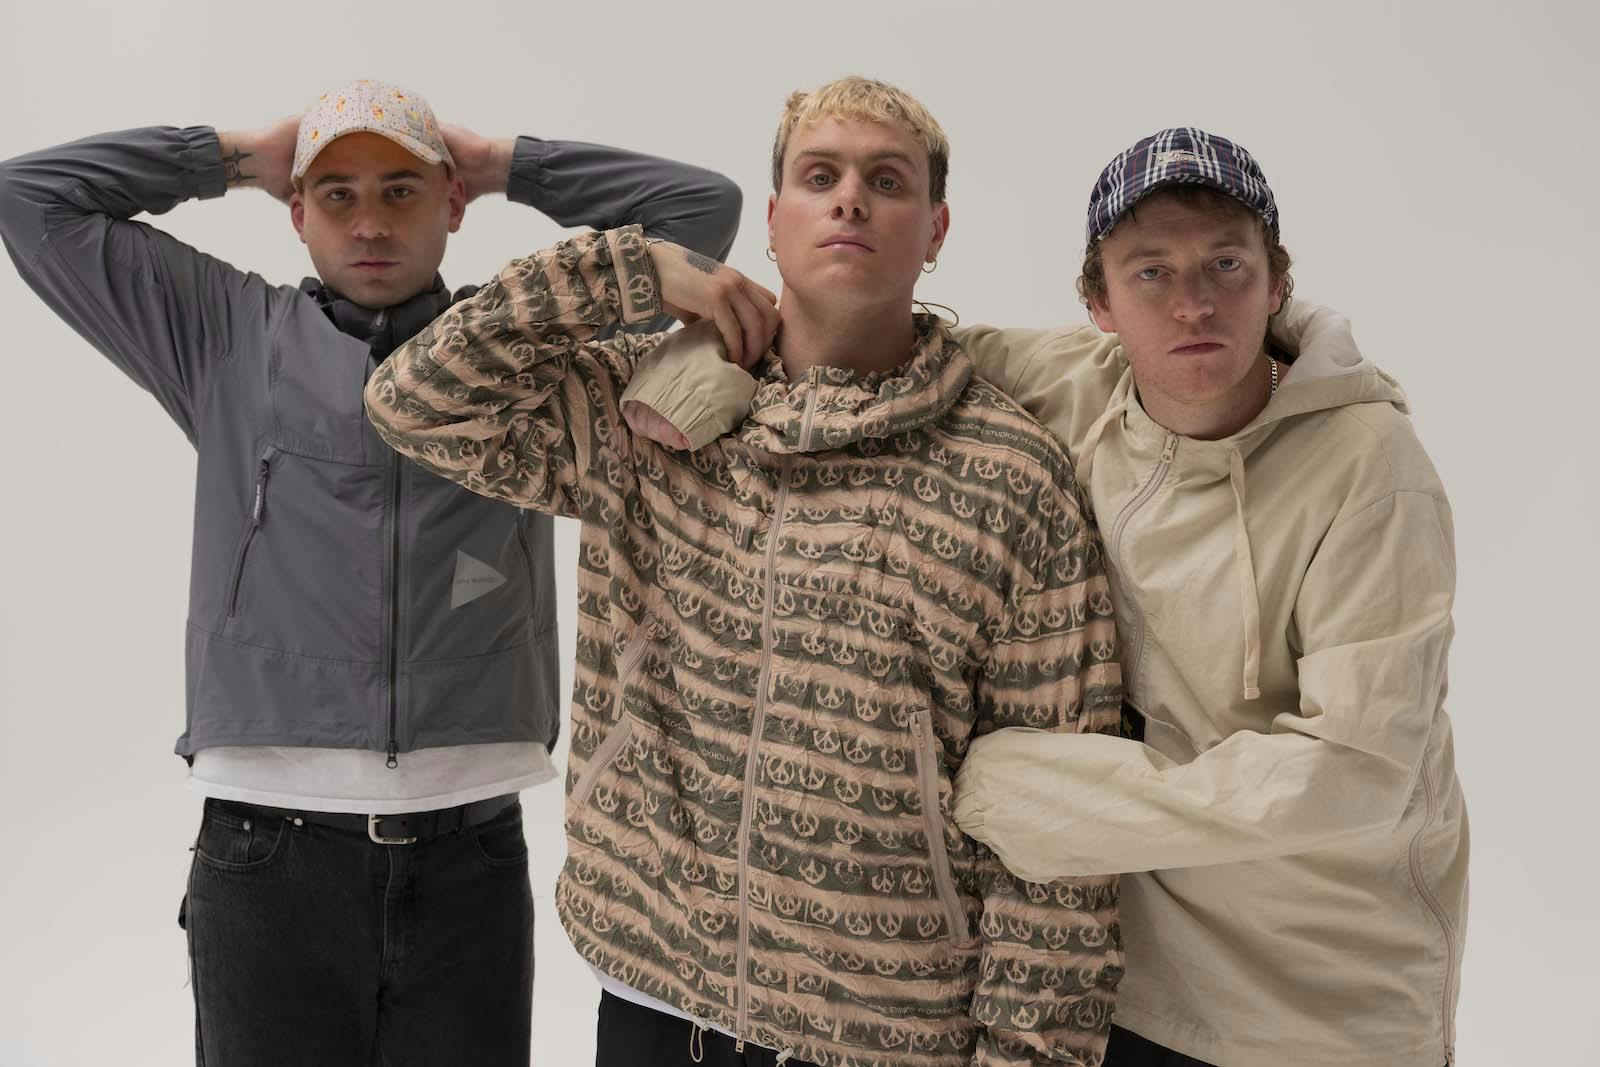 DMA's Out of the Woods Festival